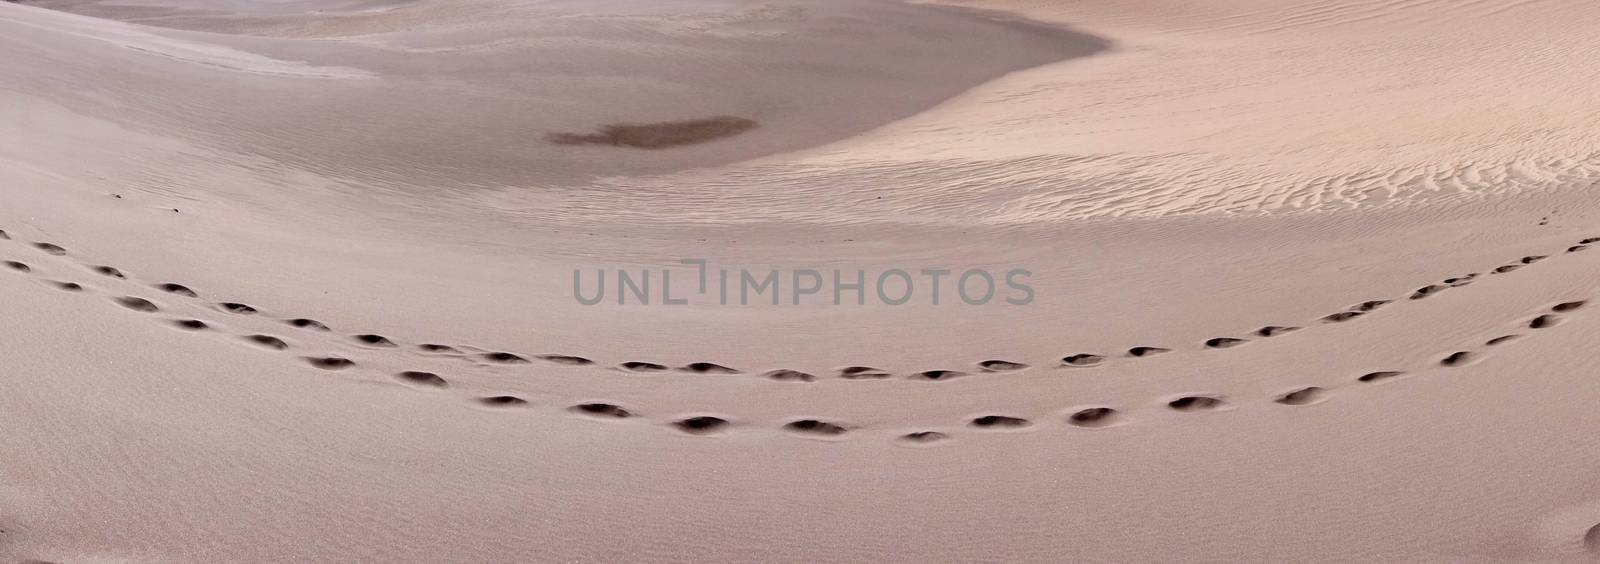 Great Sand Dunes National Park by tang90246